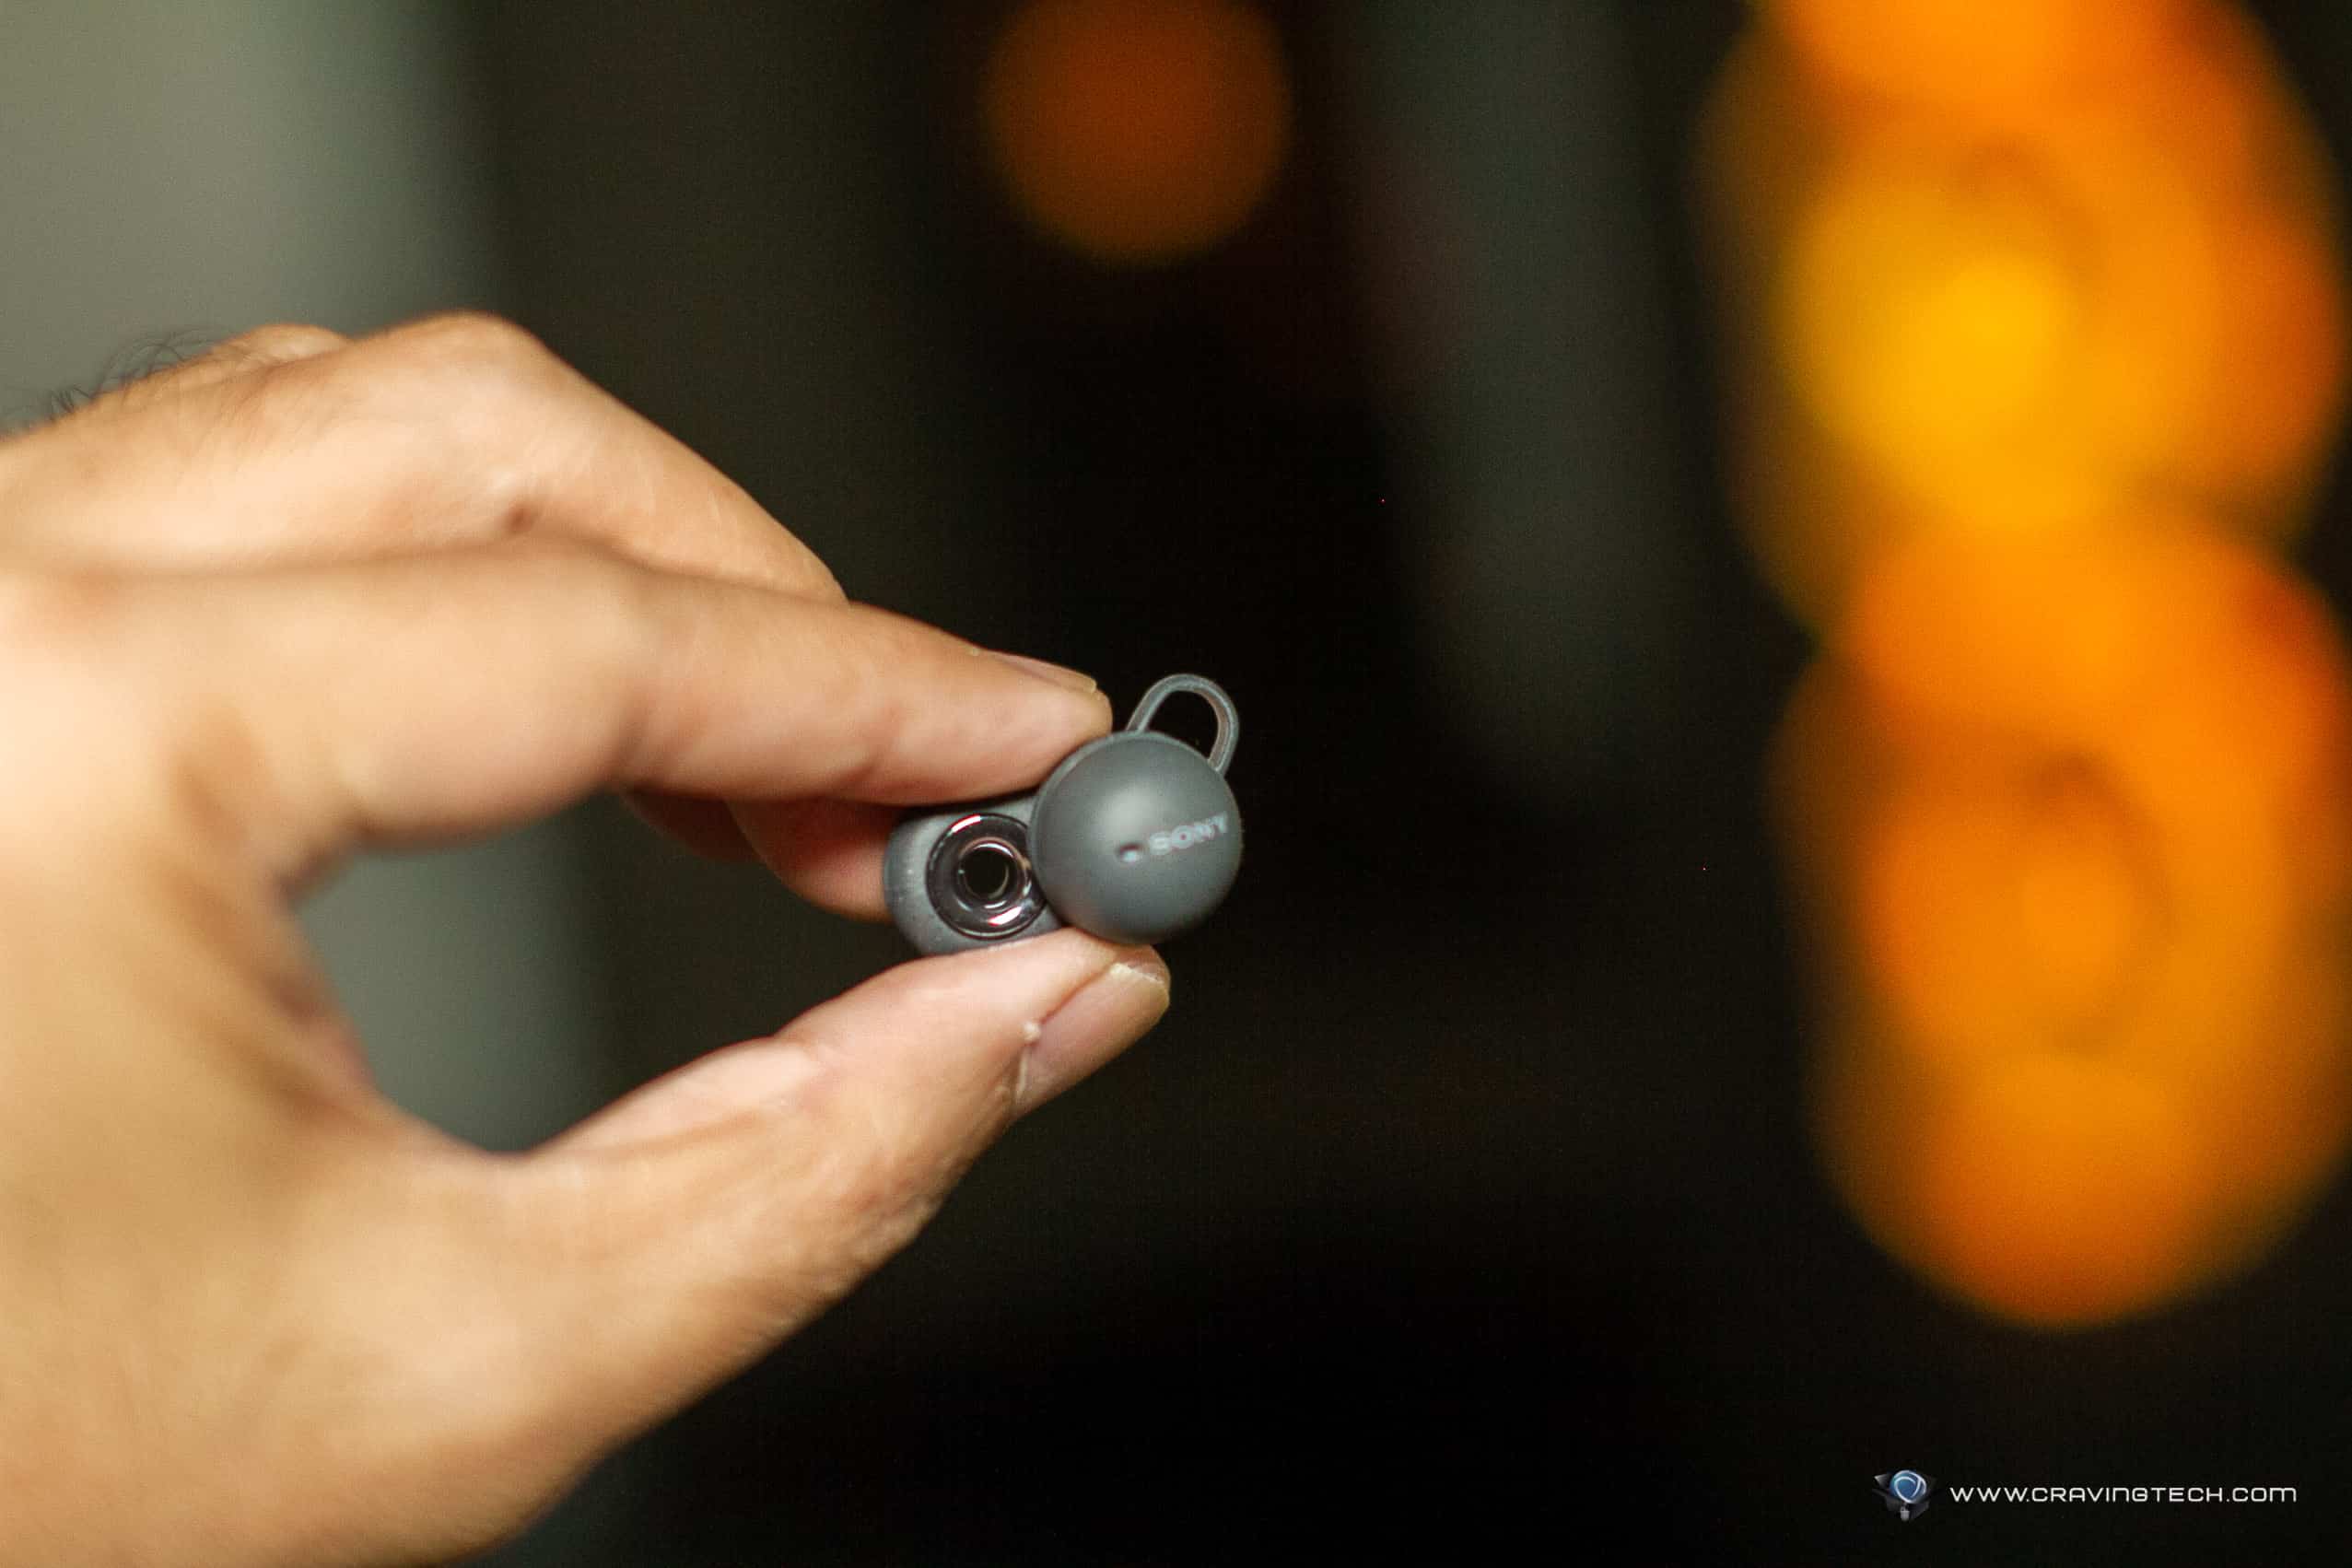 The ultimate comfort? Sony LinkBuds Review